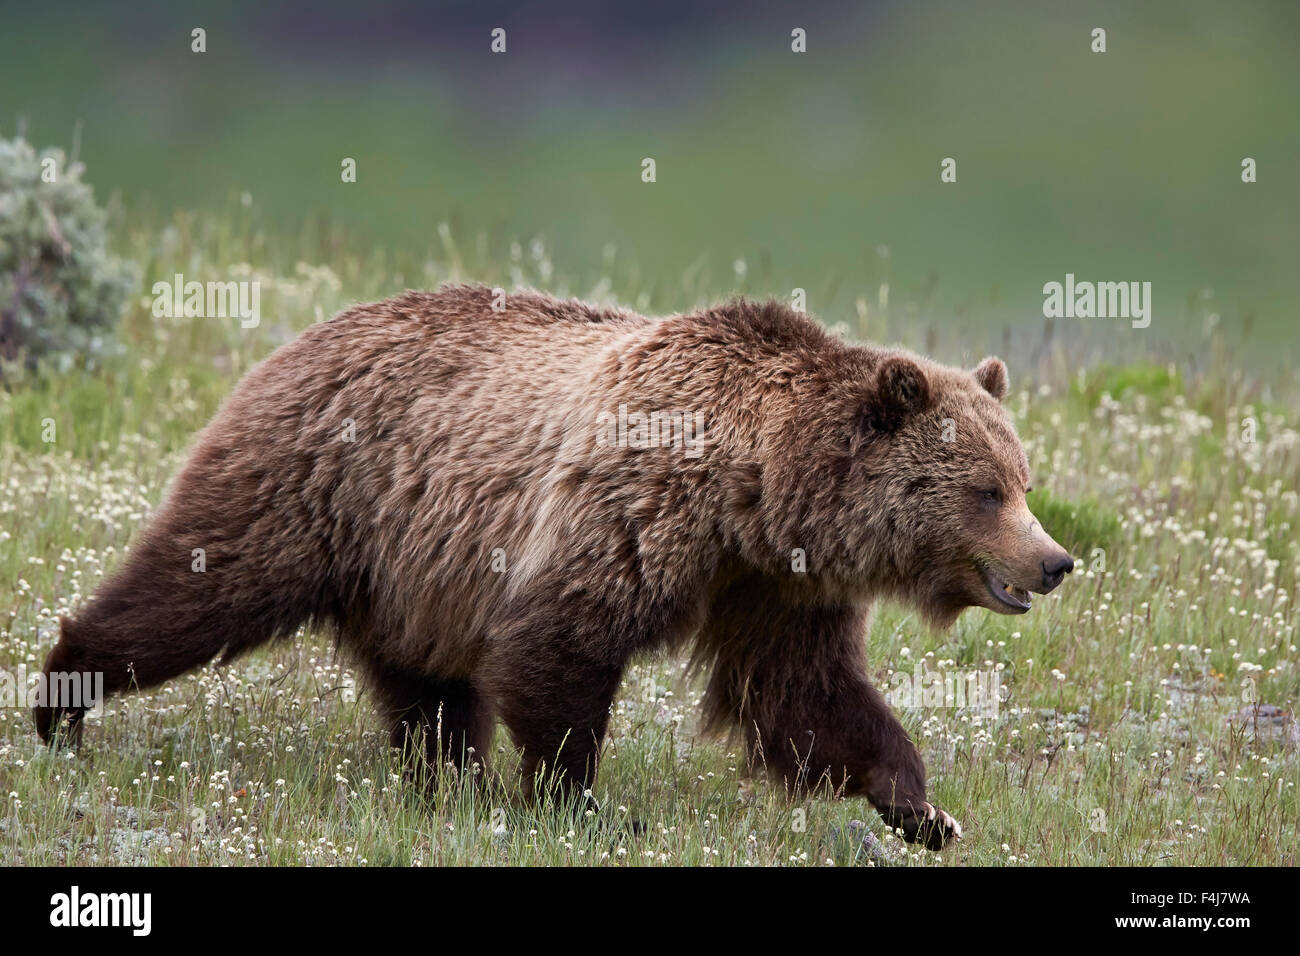 Grizzly Bear (Ursus arctos horribilis), Yellowstone National Park, Wyoming, United States of America, North America Stock Photo